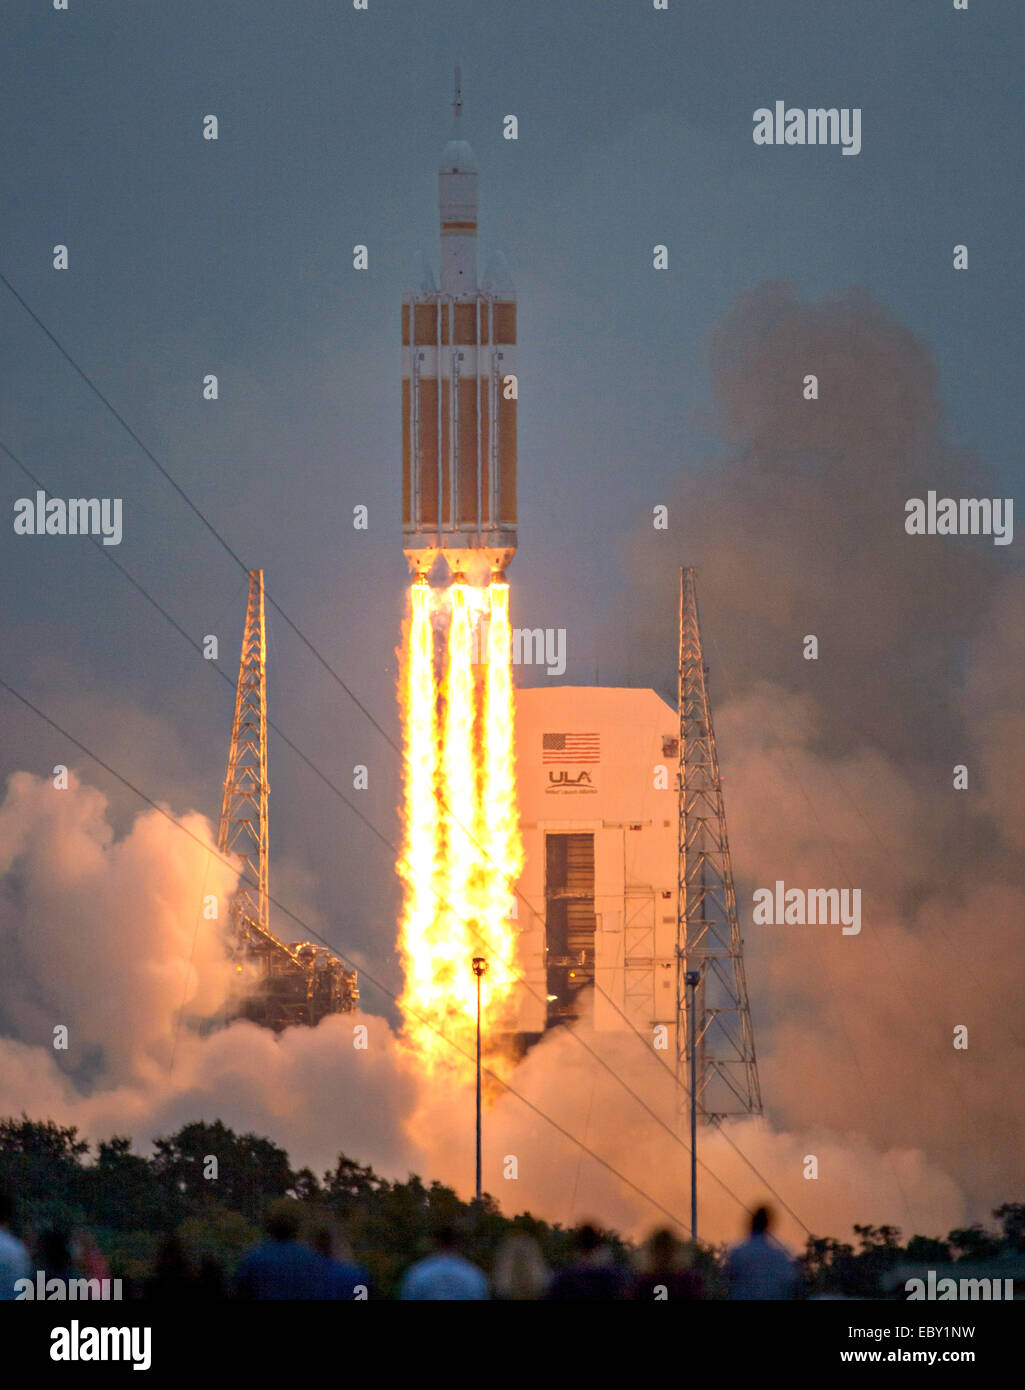 NASA's Orion spacecraft mounted atop a United Launch Alliance Delta IV Heavy rocket lifts off at Space Launch Complex 37 December 5, 2014 in Cape Canaveral, Florida. The unmanned Orion spacecraft will orbit Earth twice, reaching an altitude of approximately 3,600 miles above Earth before landing in the Pacific Ocean. Stock Photo